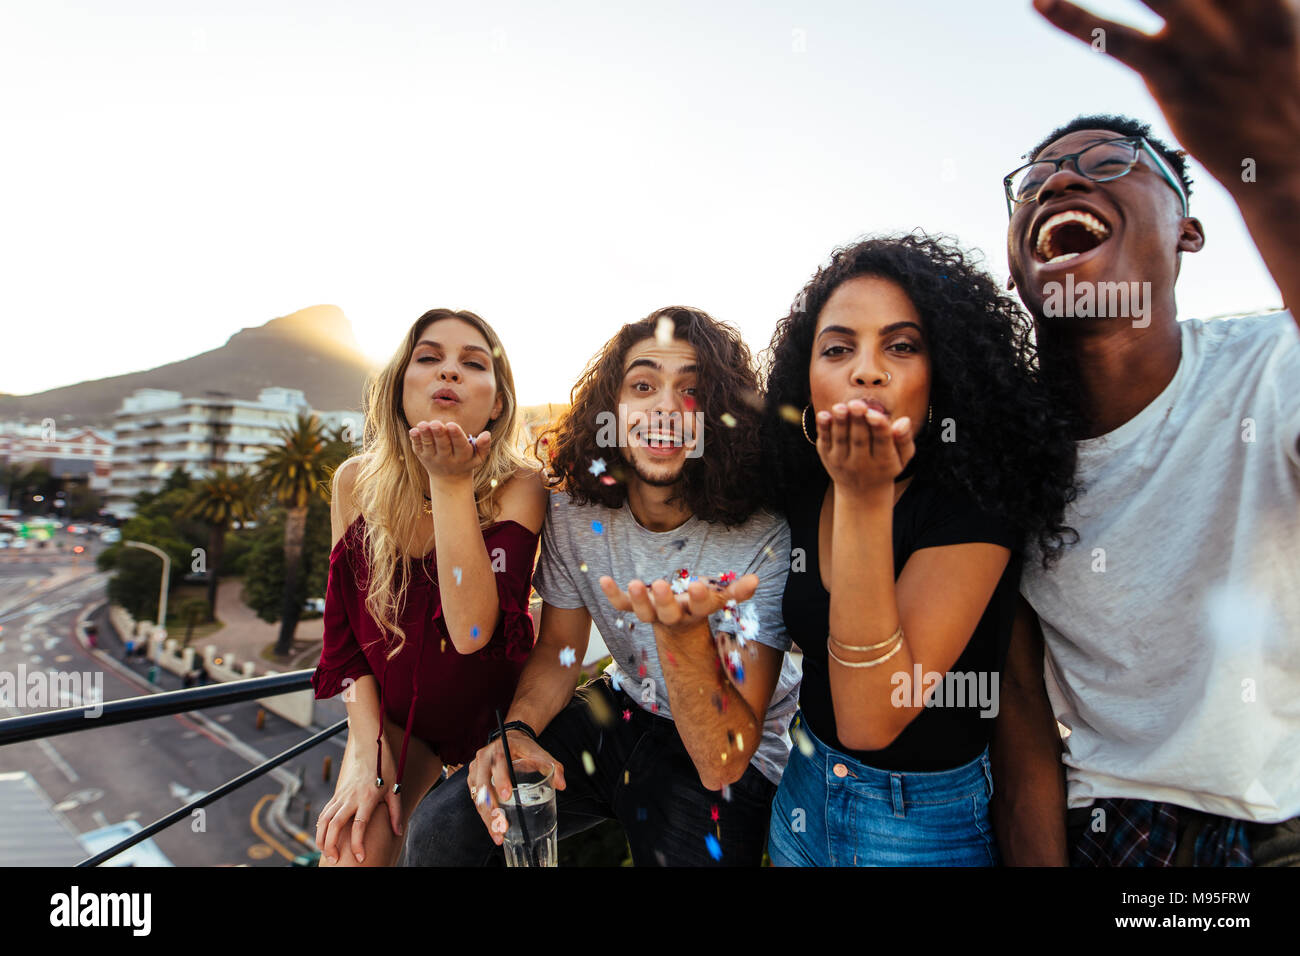 Group of friends blowing confetti at rooftop party. Men and women having a great time together on terrace party. Stock Photo